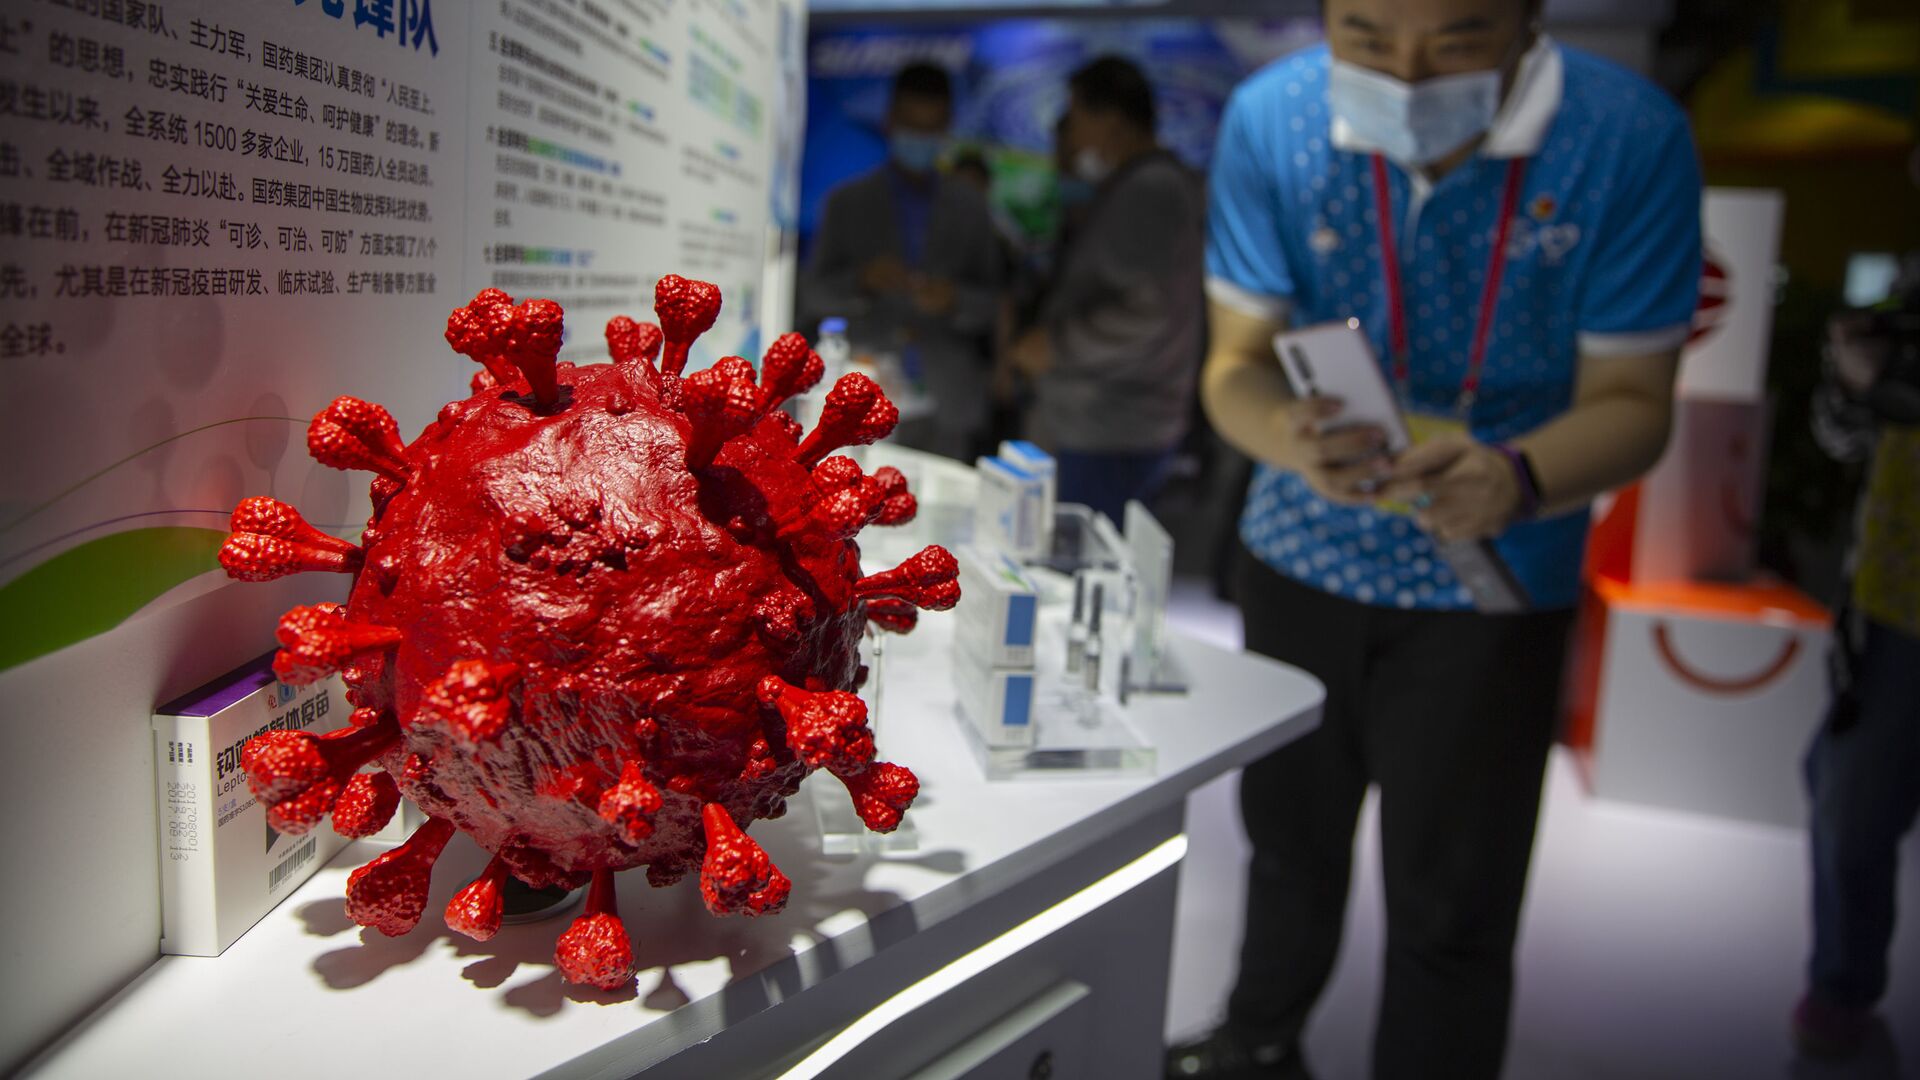 A visitor wearing a face mask takes a photo of a model of a coronavirus and boxes for COVID-19 vaccines at a display by Chinese pharmaceutical firm Sinopharm at the China International Fair for Trade in Services (CIFTIS) in Beijing, Saturday, Sept. 5, 2020. With the COVID-19 pandemic largely under control, China's capital on Saturday kicked off one of the first large-scale public events since the start of the coronavirus outbreak, as tens of thousands of attendees were expected to visit displays from nearly 2,000 Chinese and foreign companies showcasing their products and services. - Sputnik International, 1920, 22.02.2021